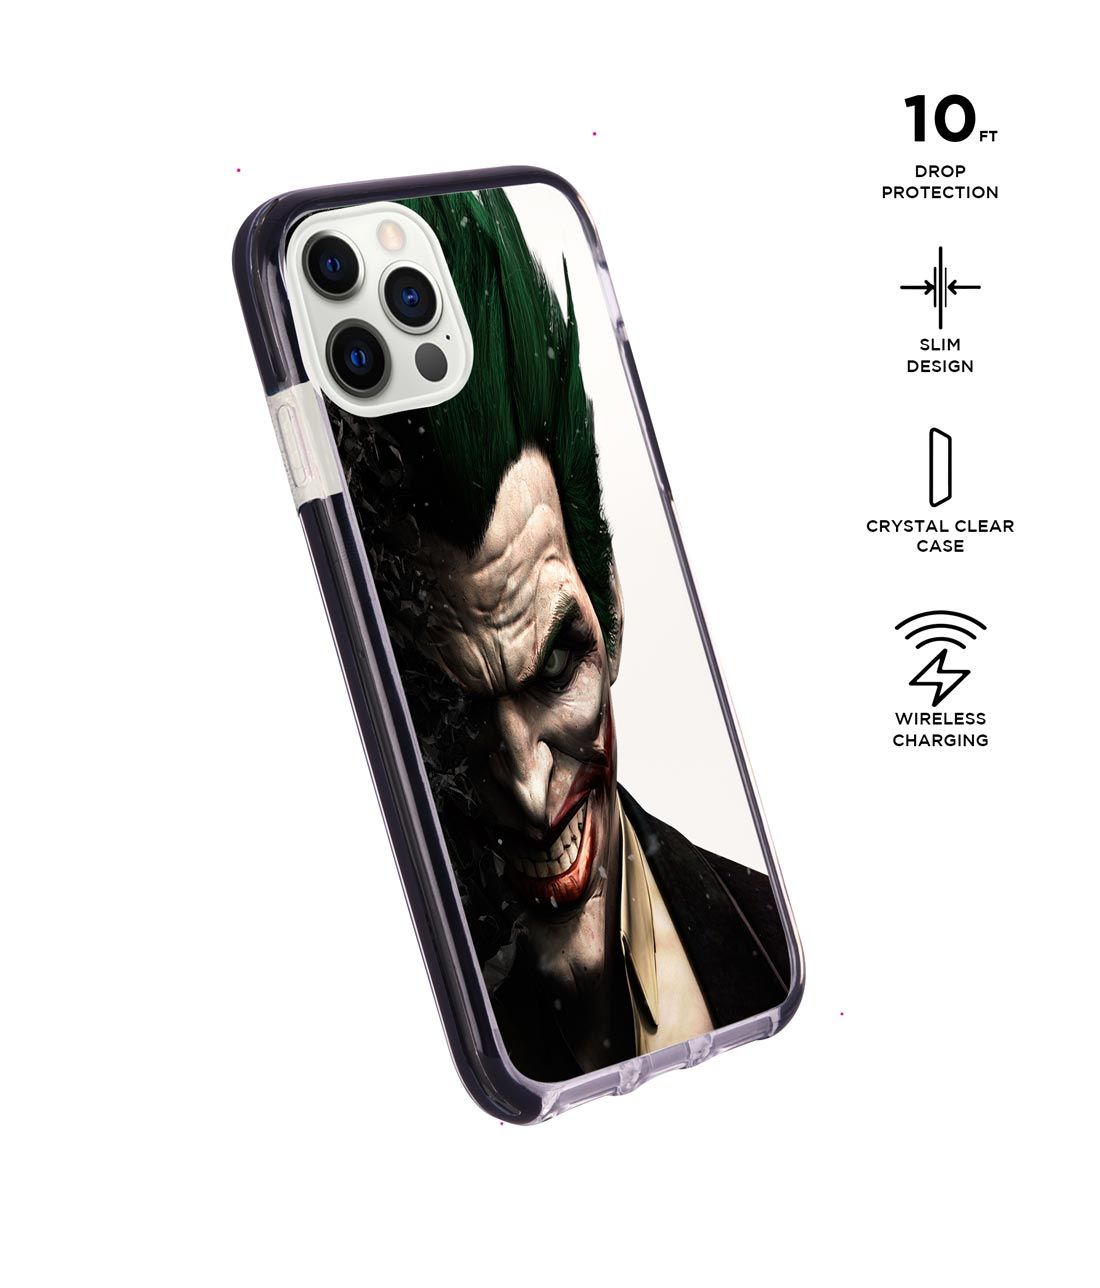 Joker Withers - Extreme Case for iPhone 12 Pro Max